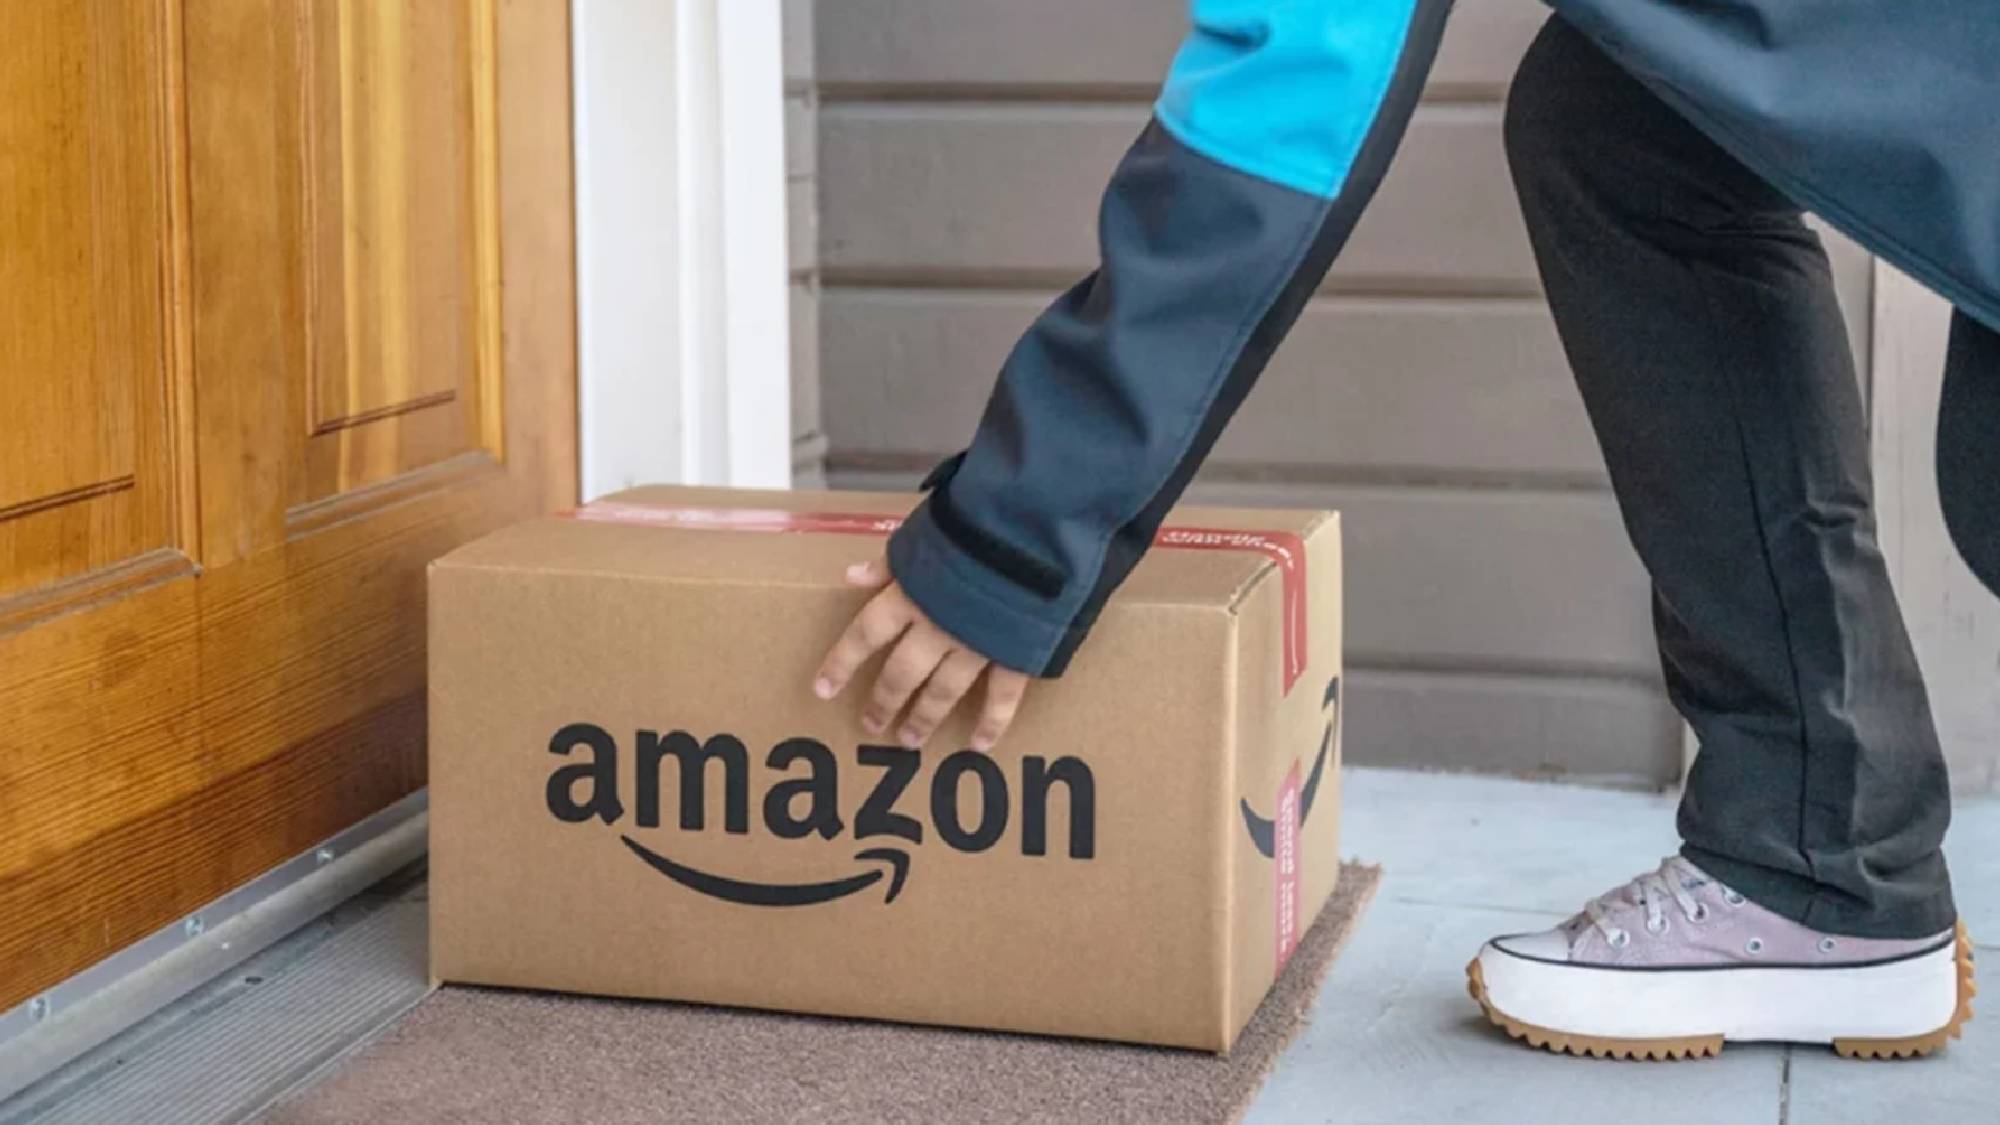 Amazon Big Spring Sale delivery person dropping off Amazon package at front door